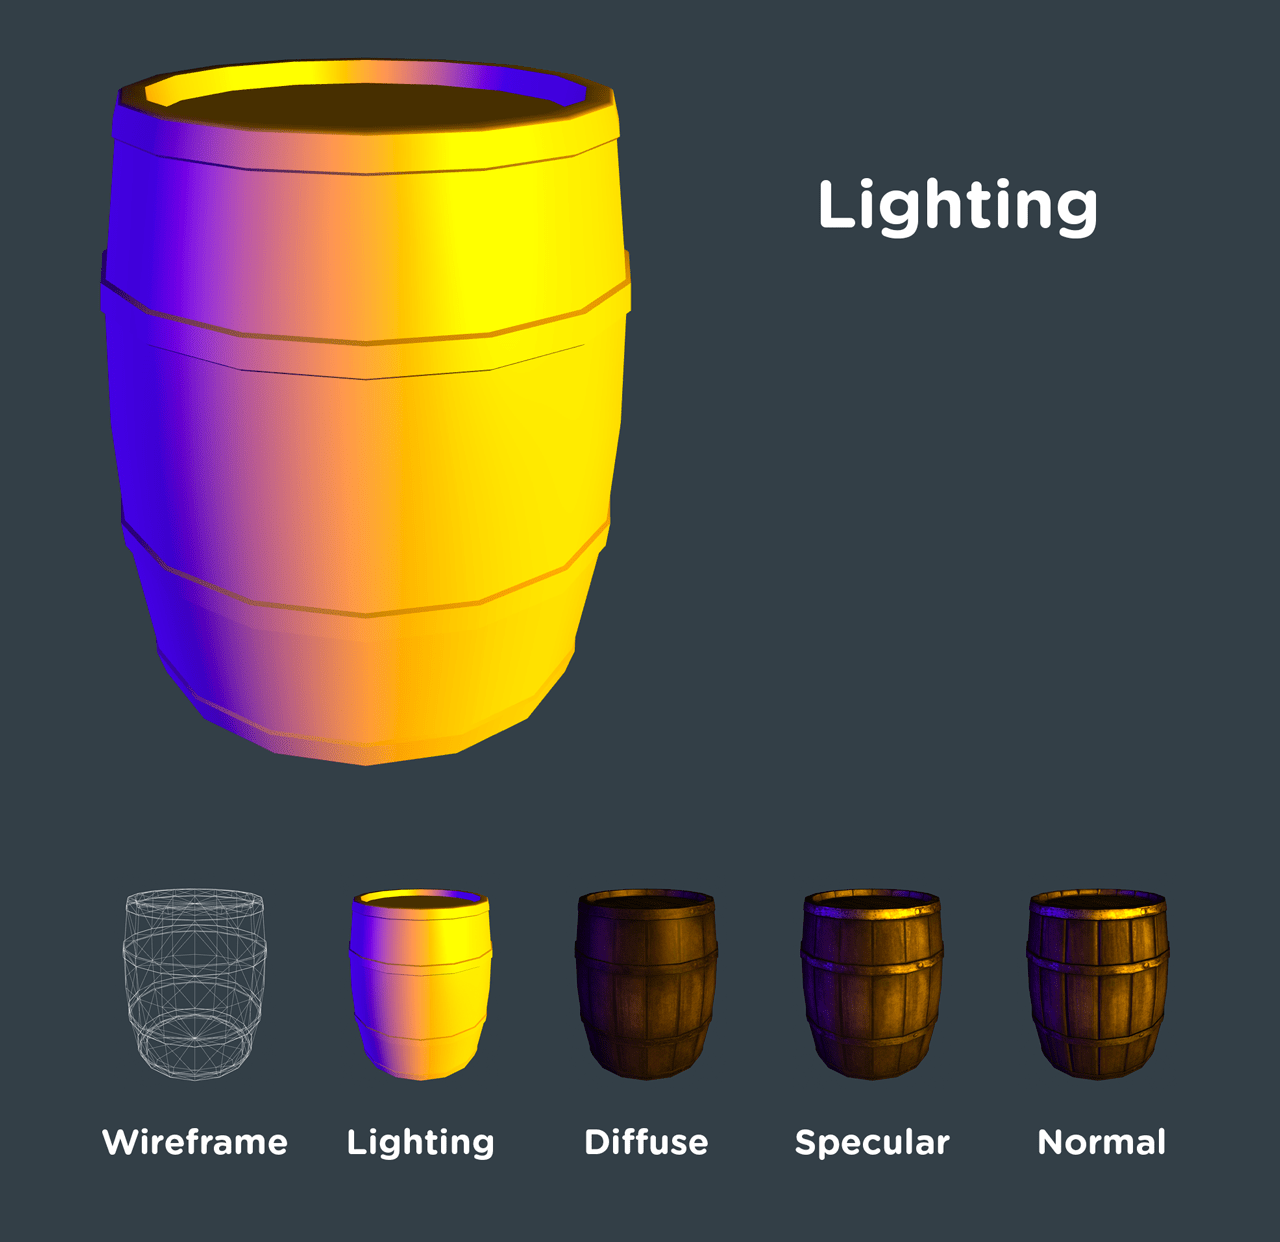 Barrel geometry with lighting applied.